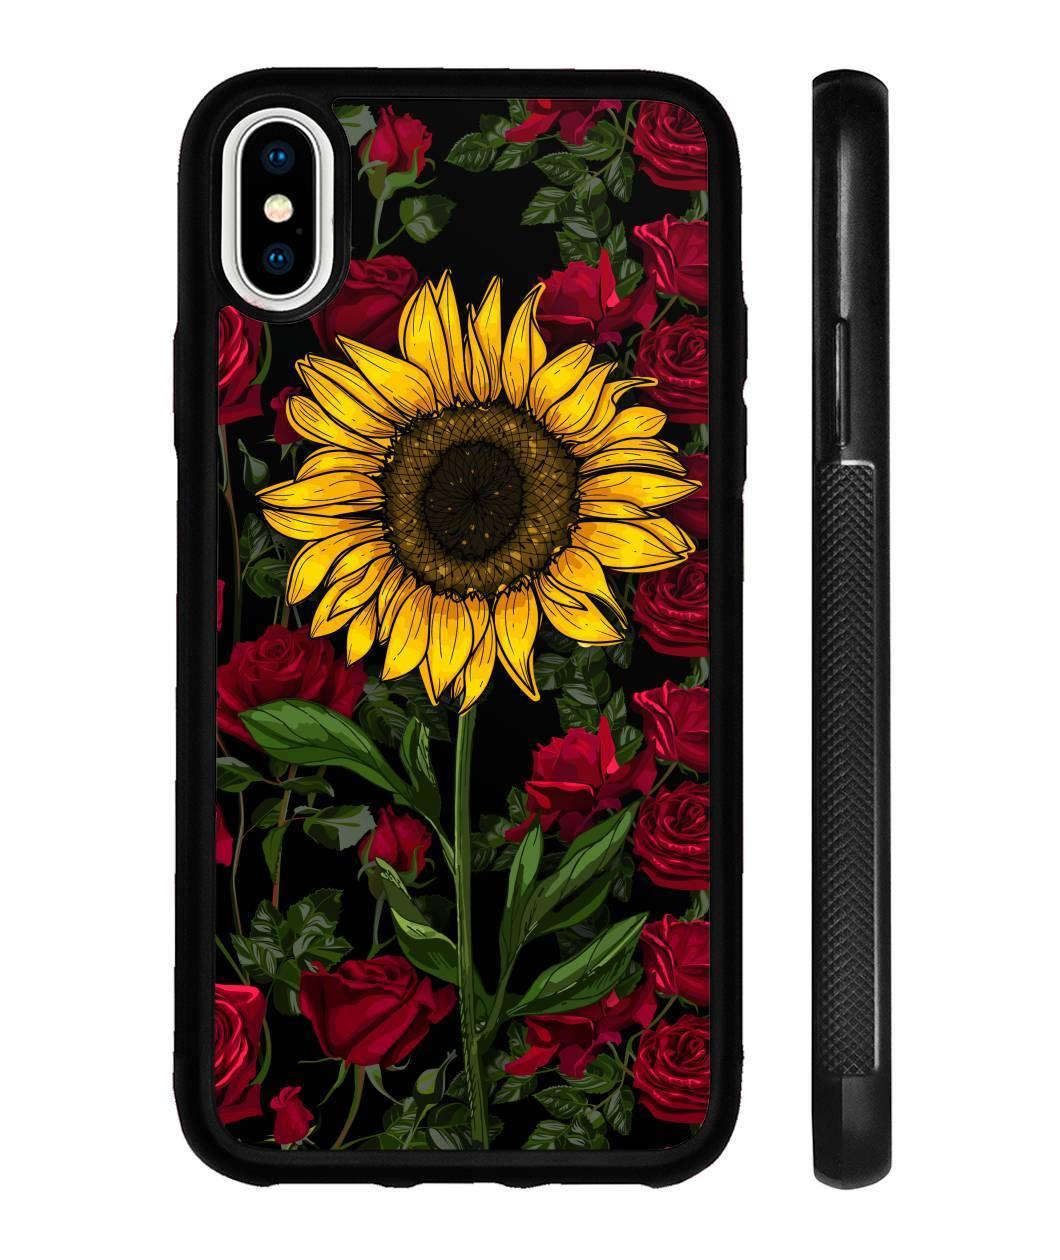 Rose sunflower phone case - limited edition